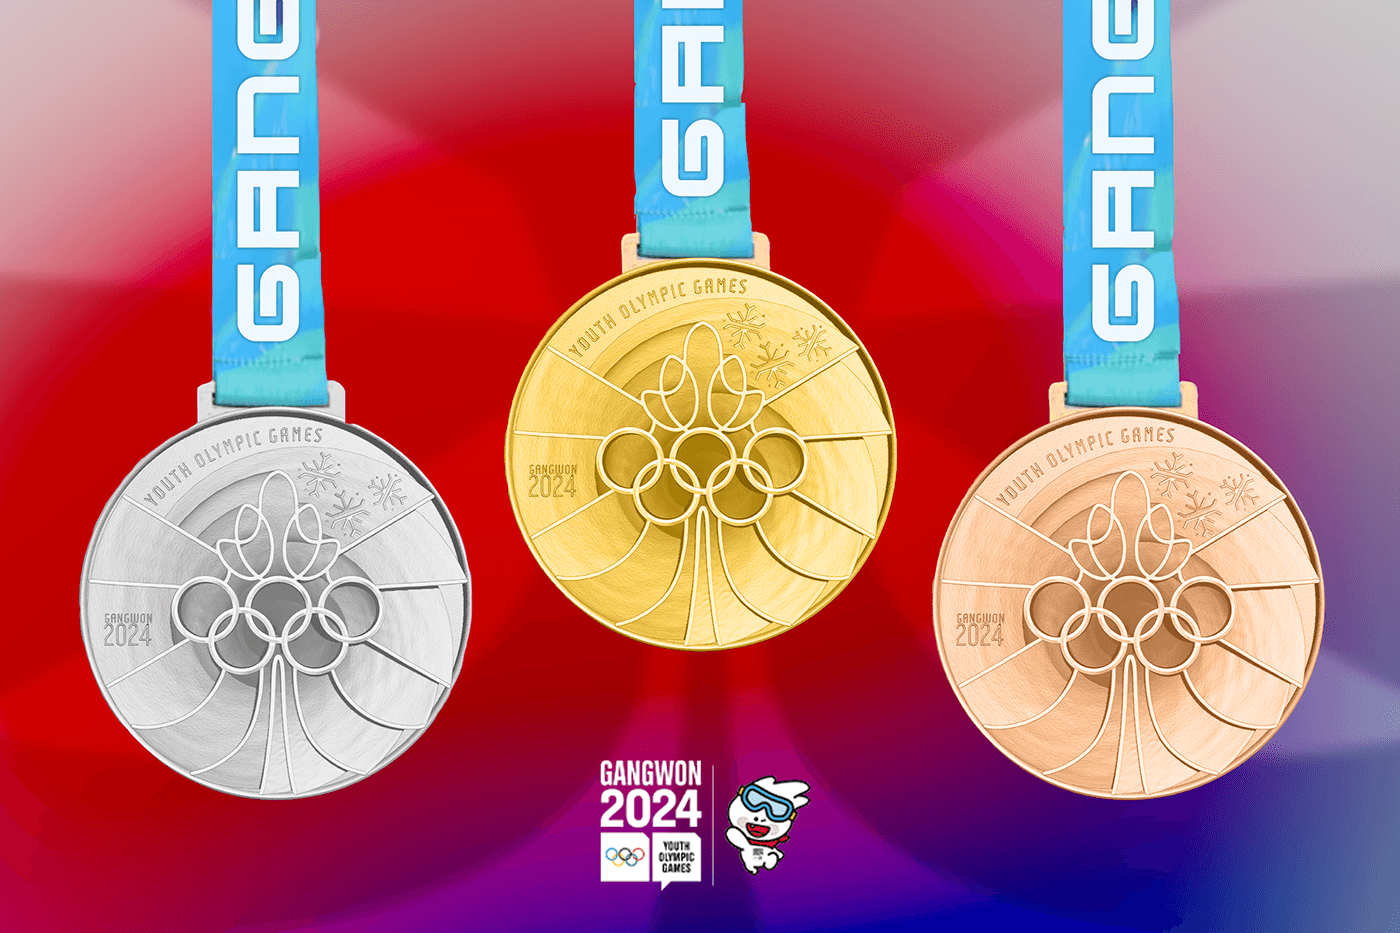 Medal medals Medal Design Olympics Olympic Games sports Gangwon 2024 winter olympics